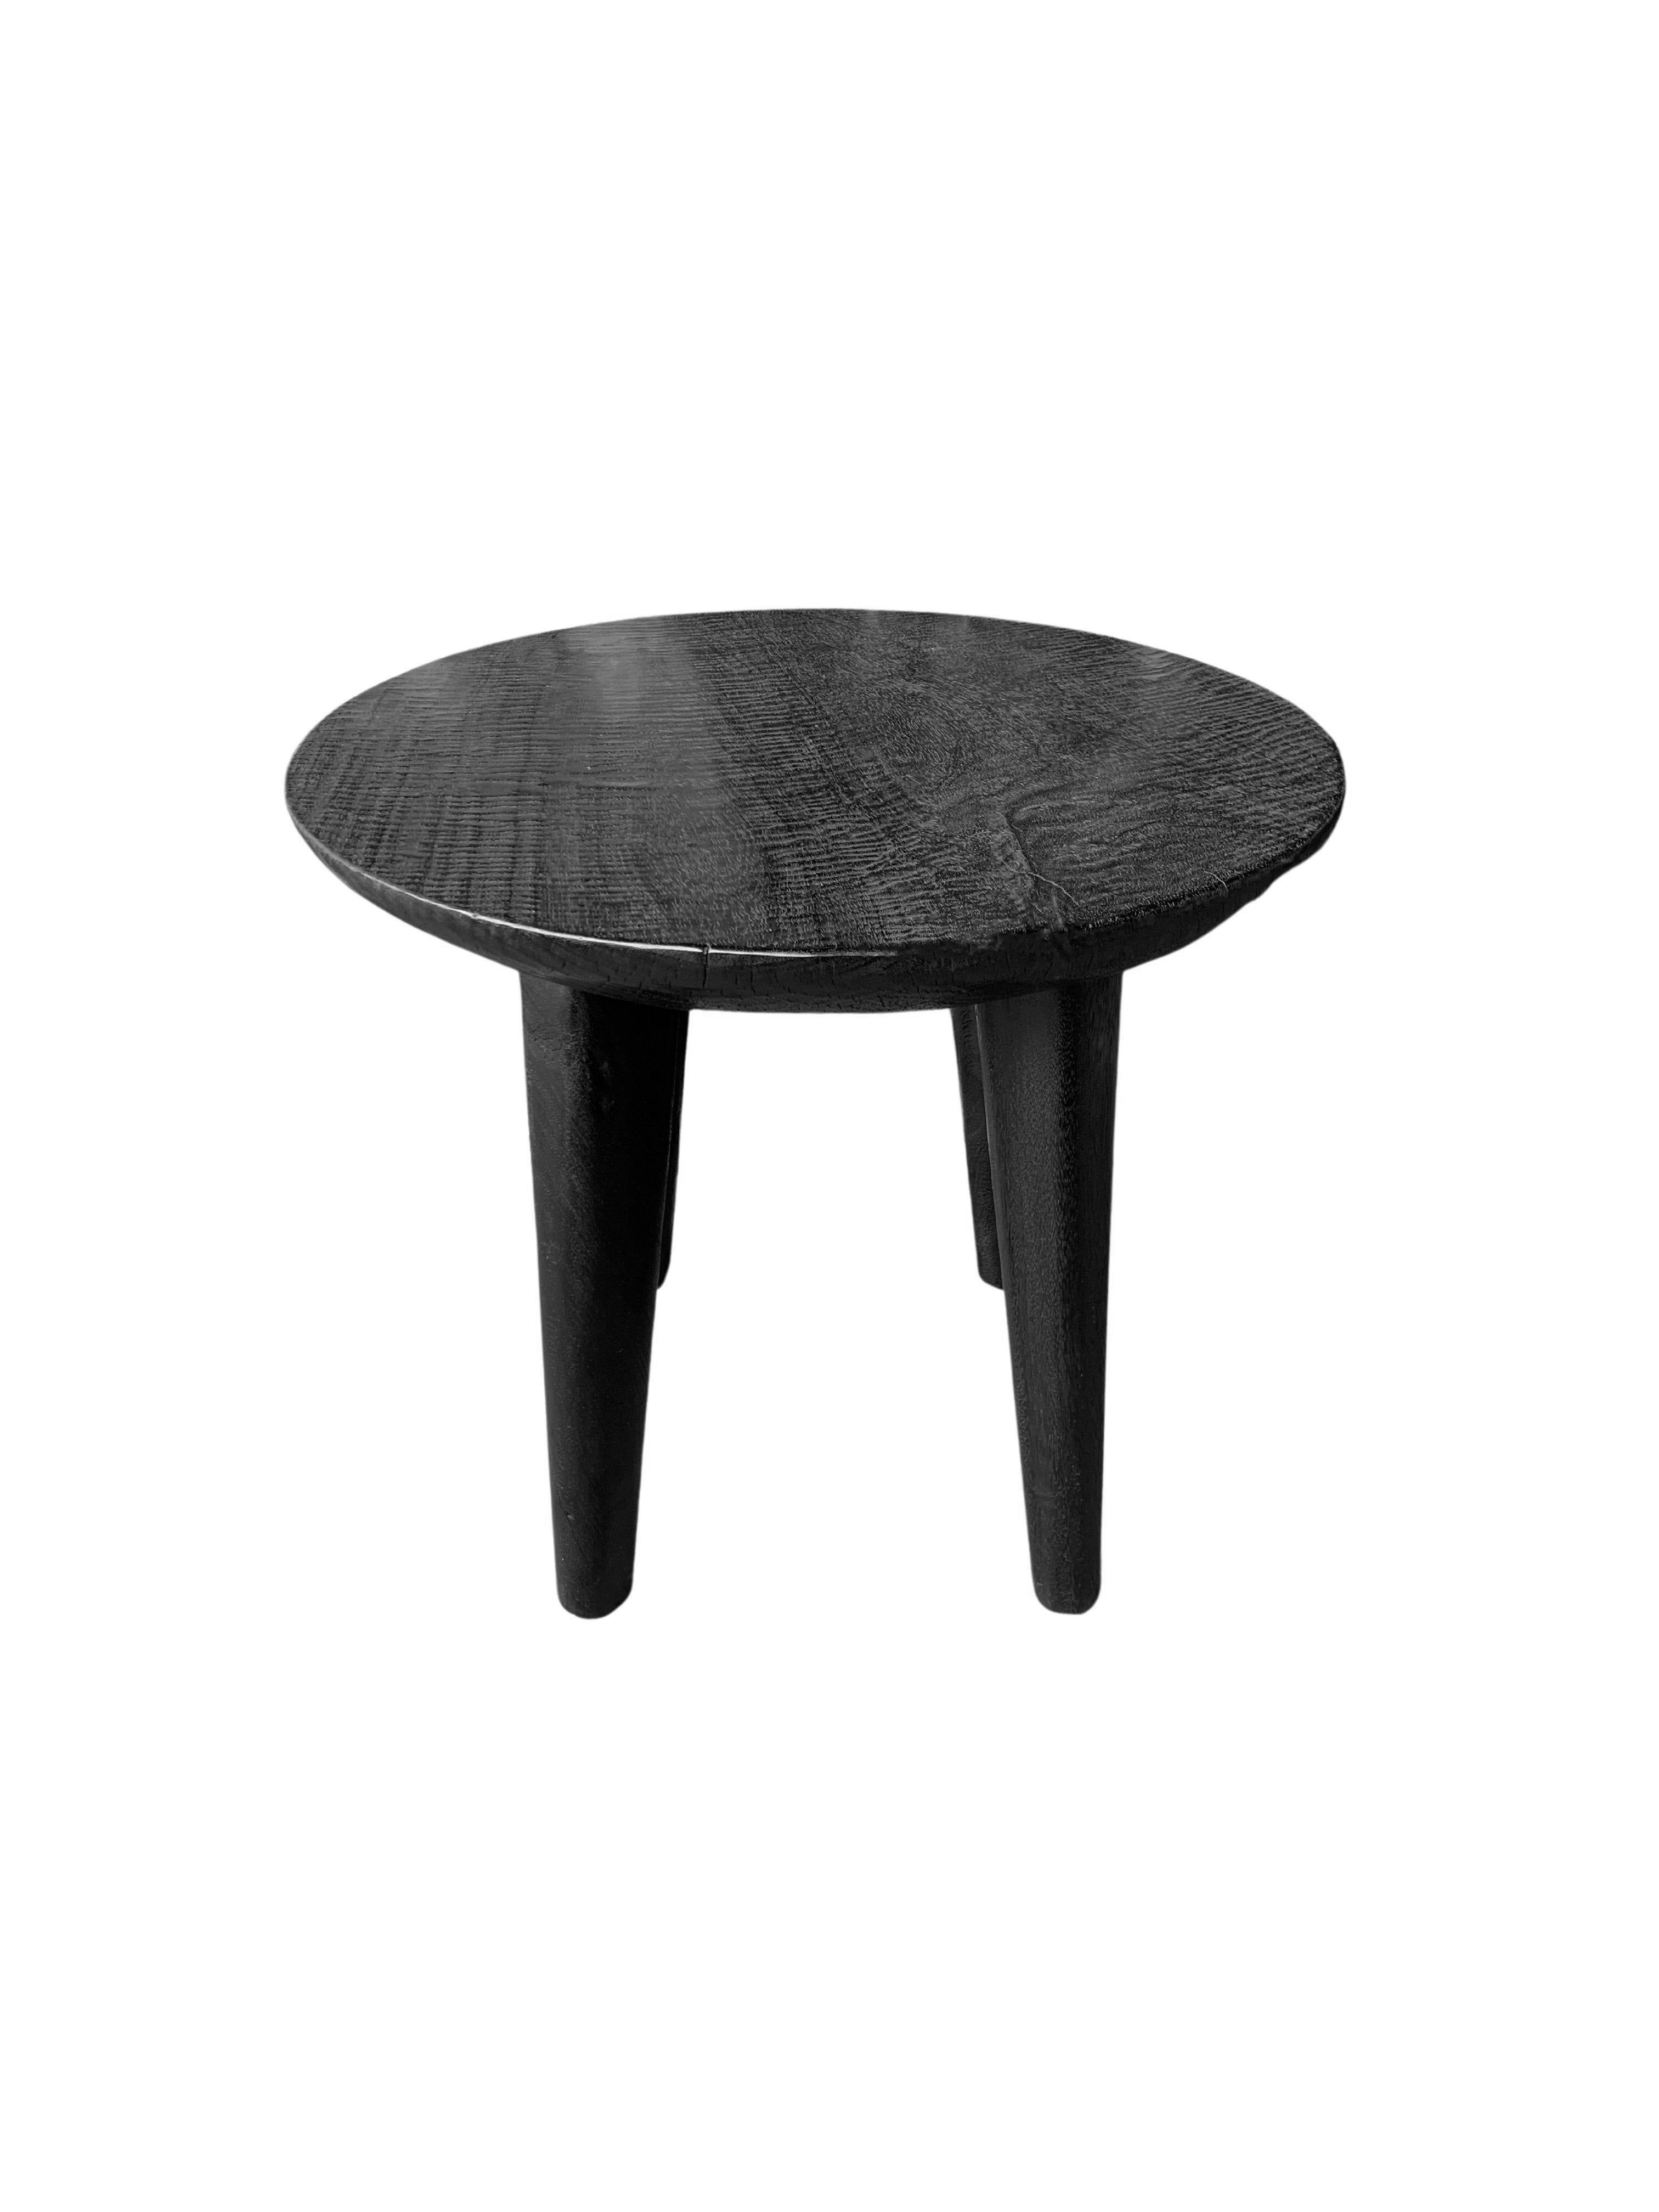 Organic Modern Sculptural Side Table Crafted from Mango Wood & Burnt, Black Finish For Sale